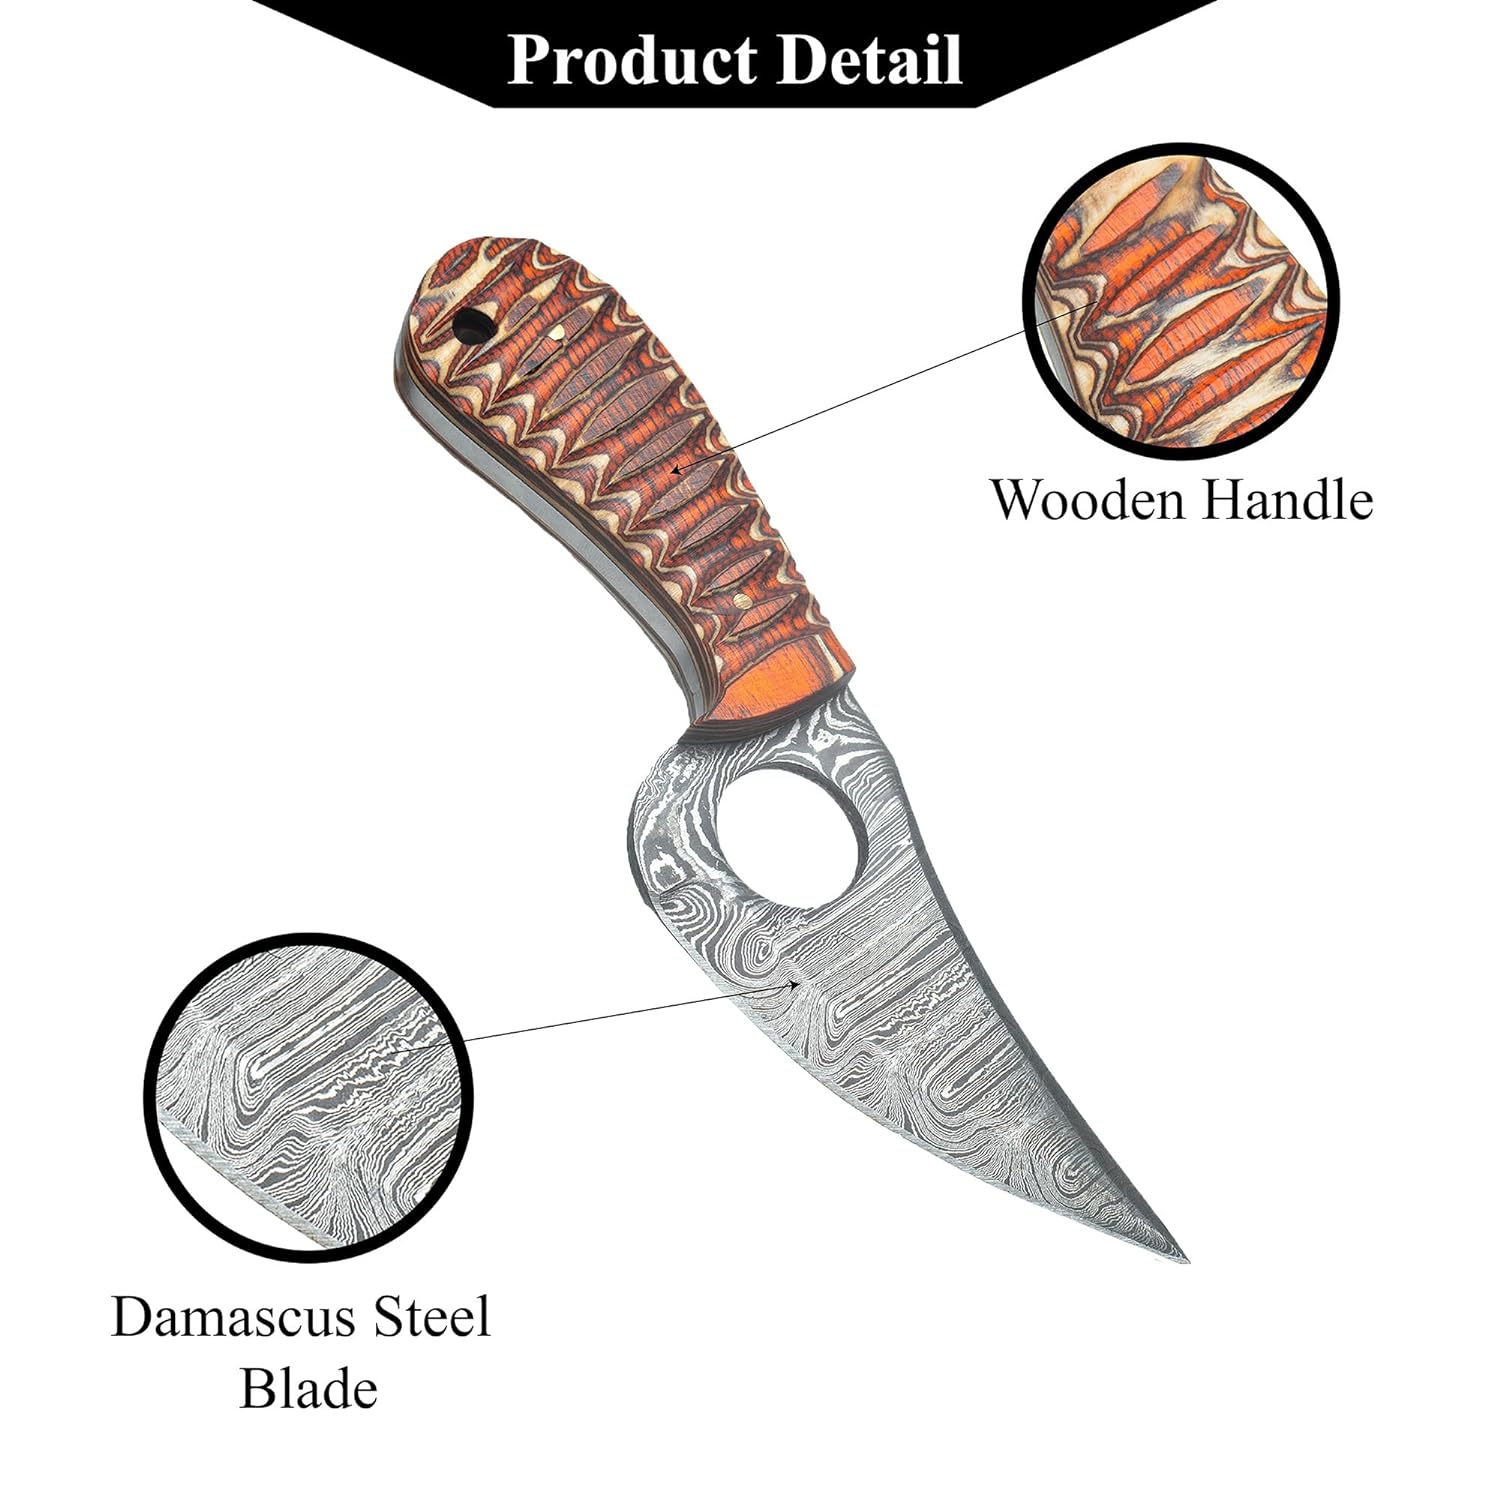 Handmade Damascus Predator Hunter Knife with Custom Leather Sheath - For Skinning, Camping, Outdoor - EDC 7” Fixed Blade Bushcraft Knives | Red Black Exotic Wood Handle (H2)